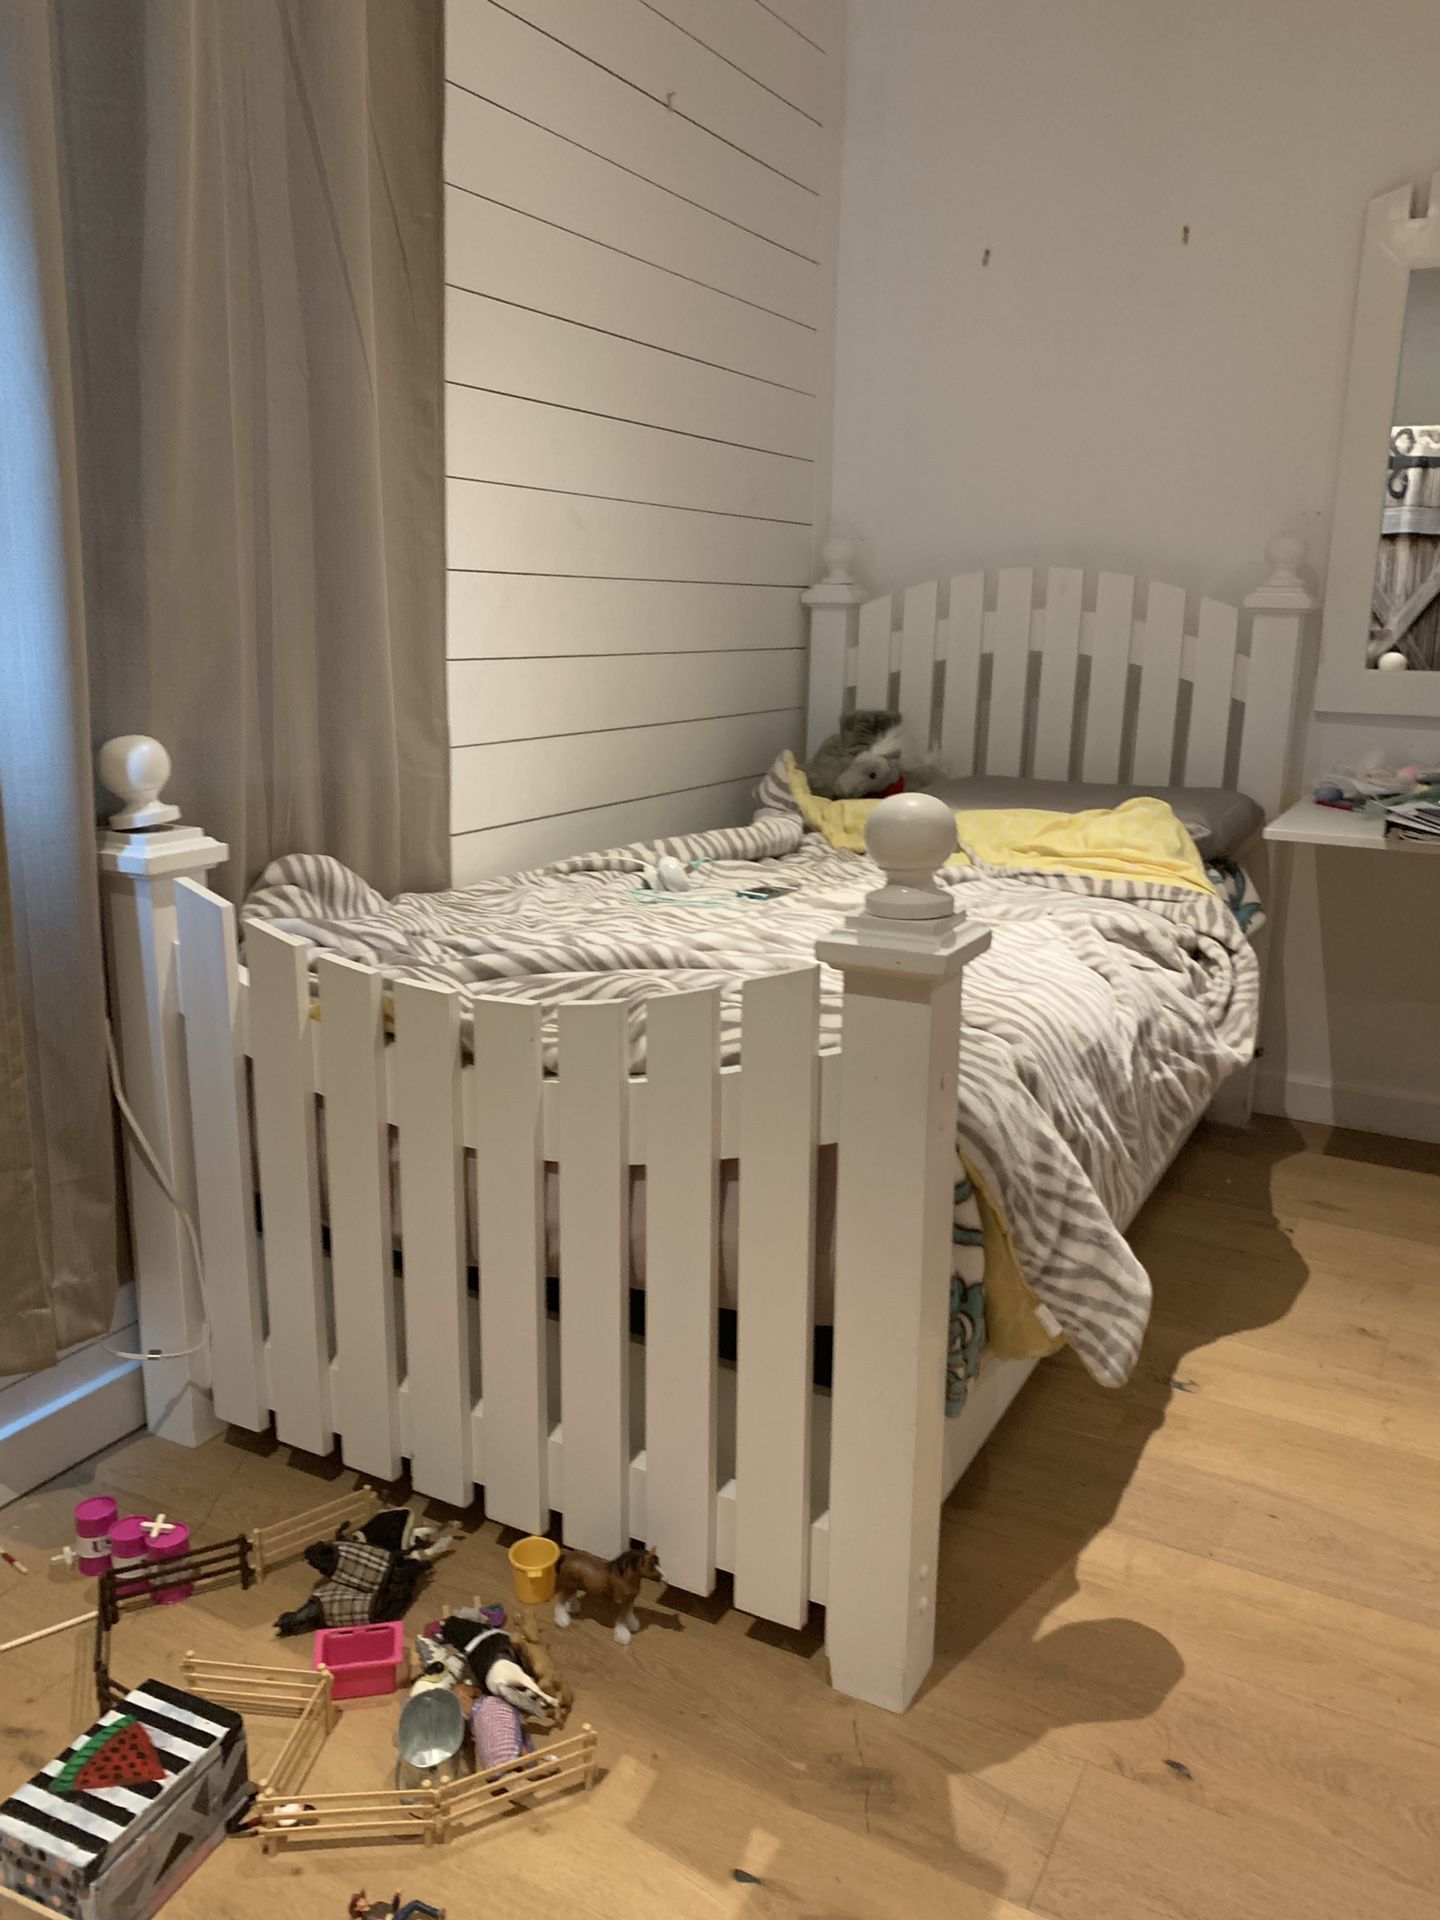 Trundle bed and mirror